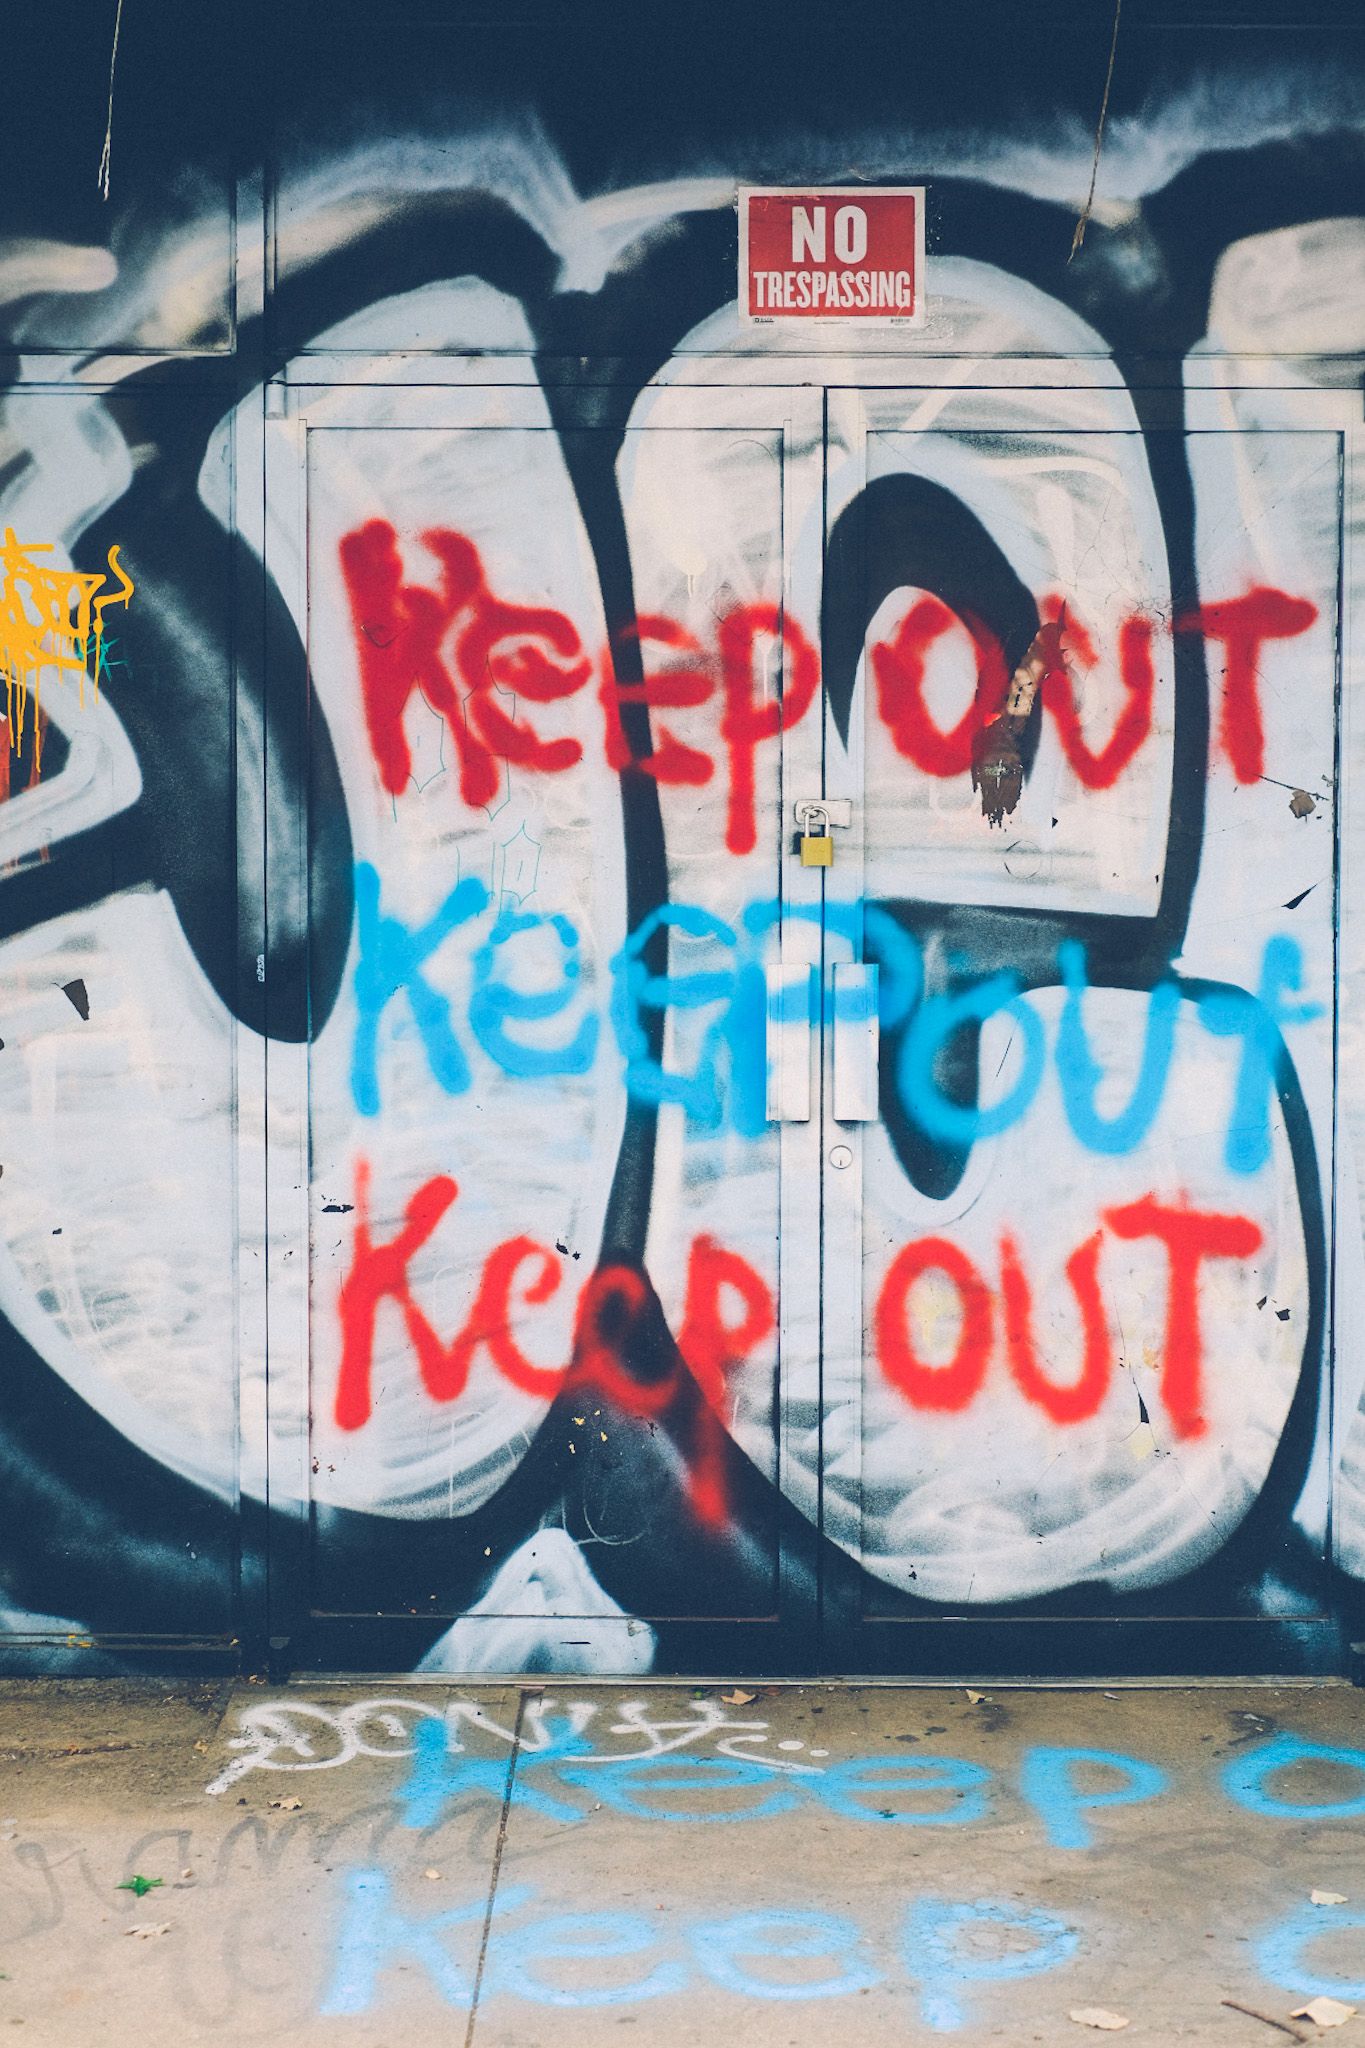 Graffiti across the front doors of a building repeats the words “KEEP OUT” three times in alternating blue and red, also repeated across the sidewalk.